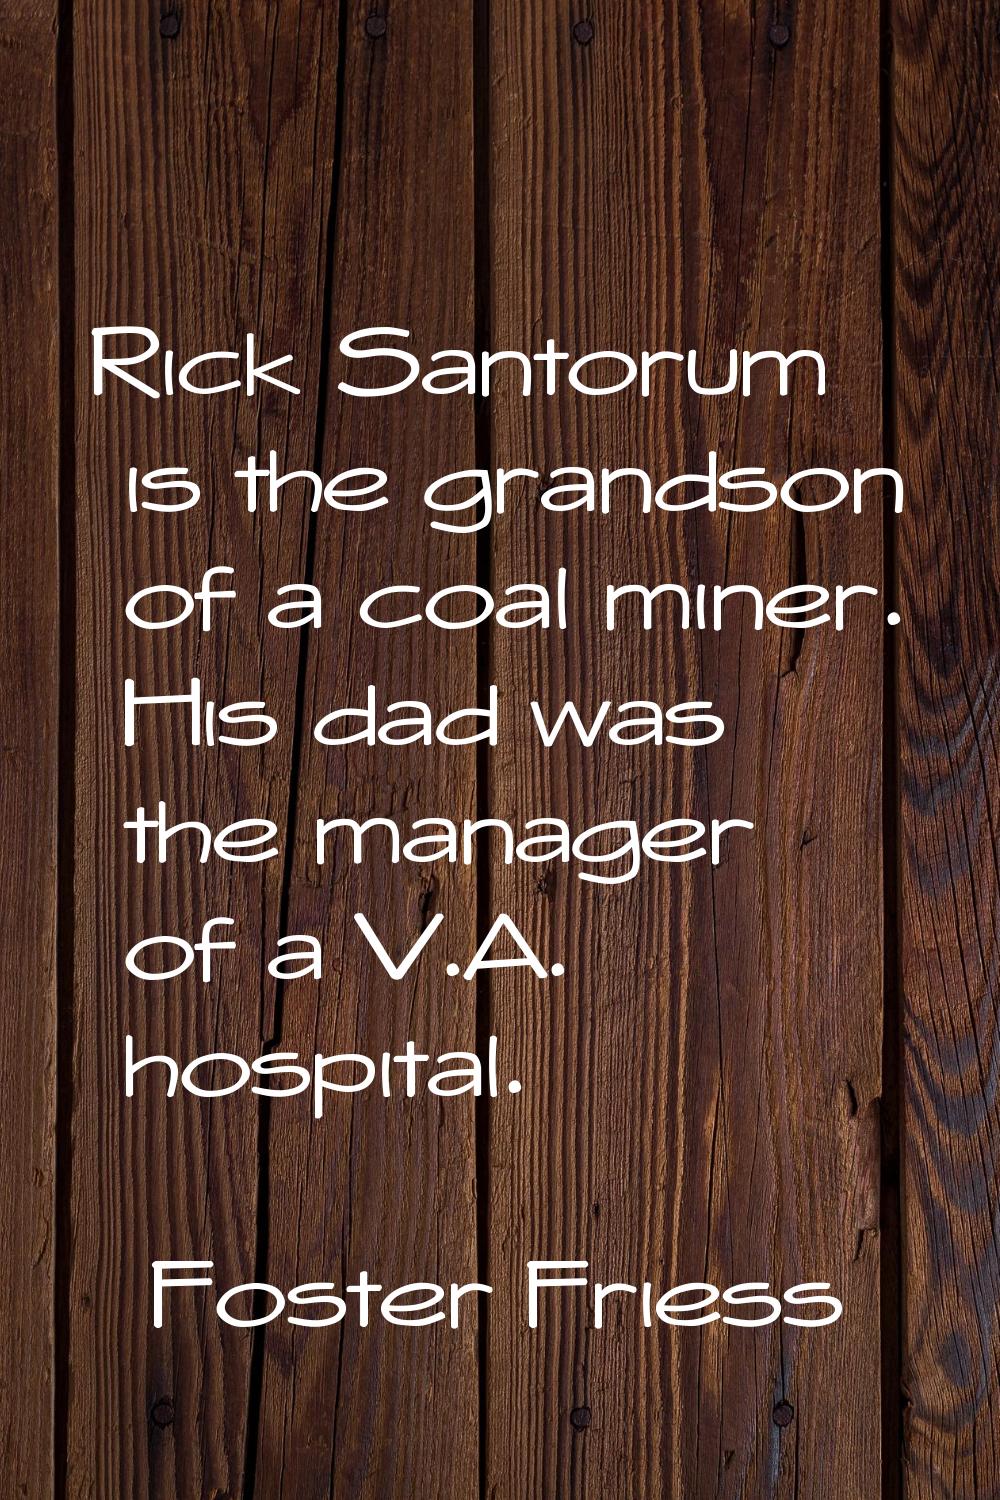 Rick Santorum is the grandson of a coal miner. His dad was the manager of a V.A. hospital.